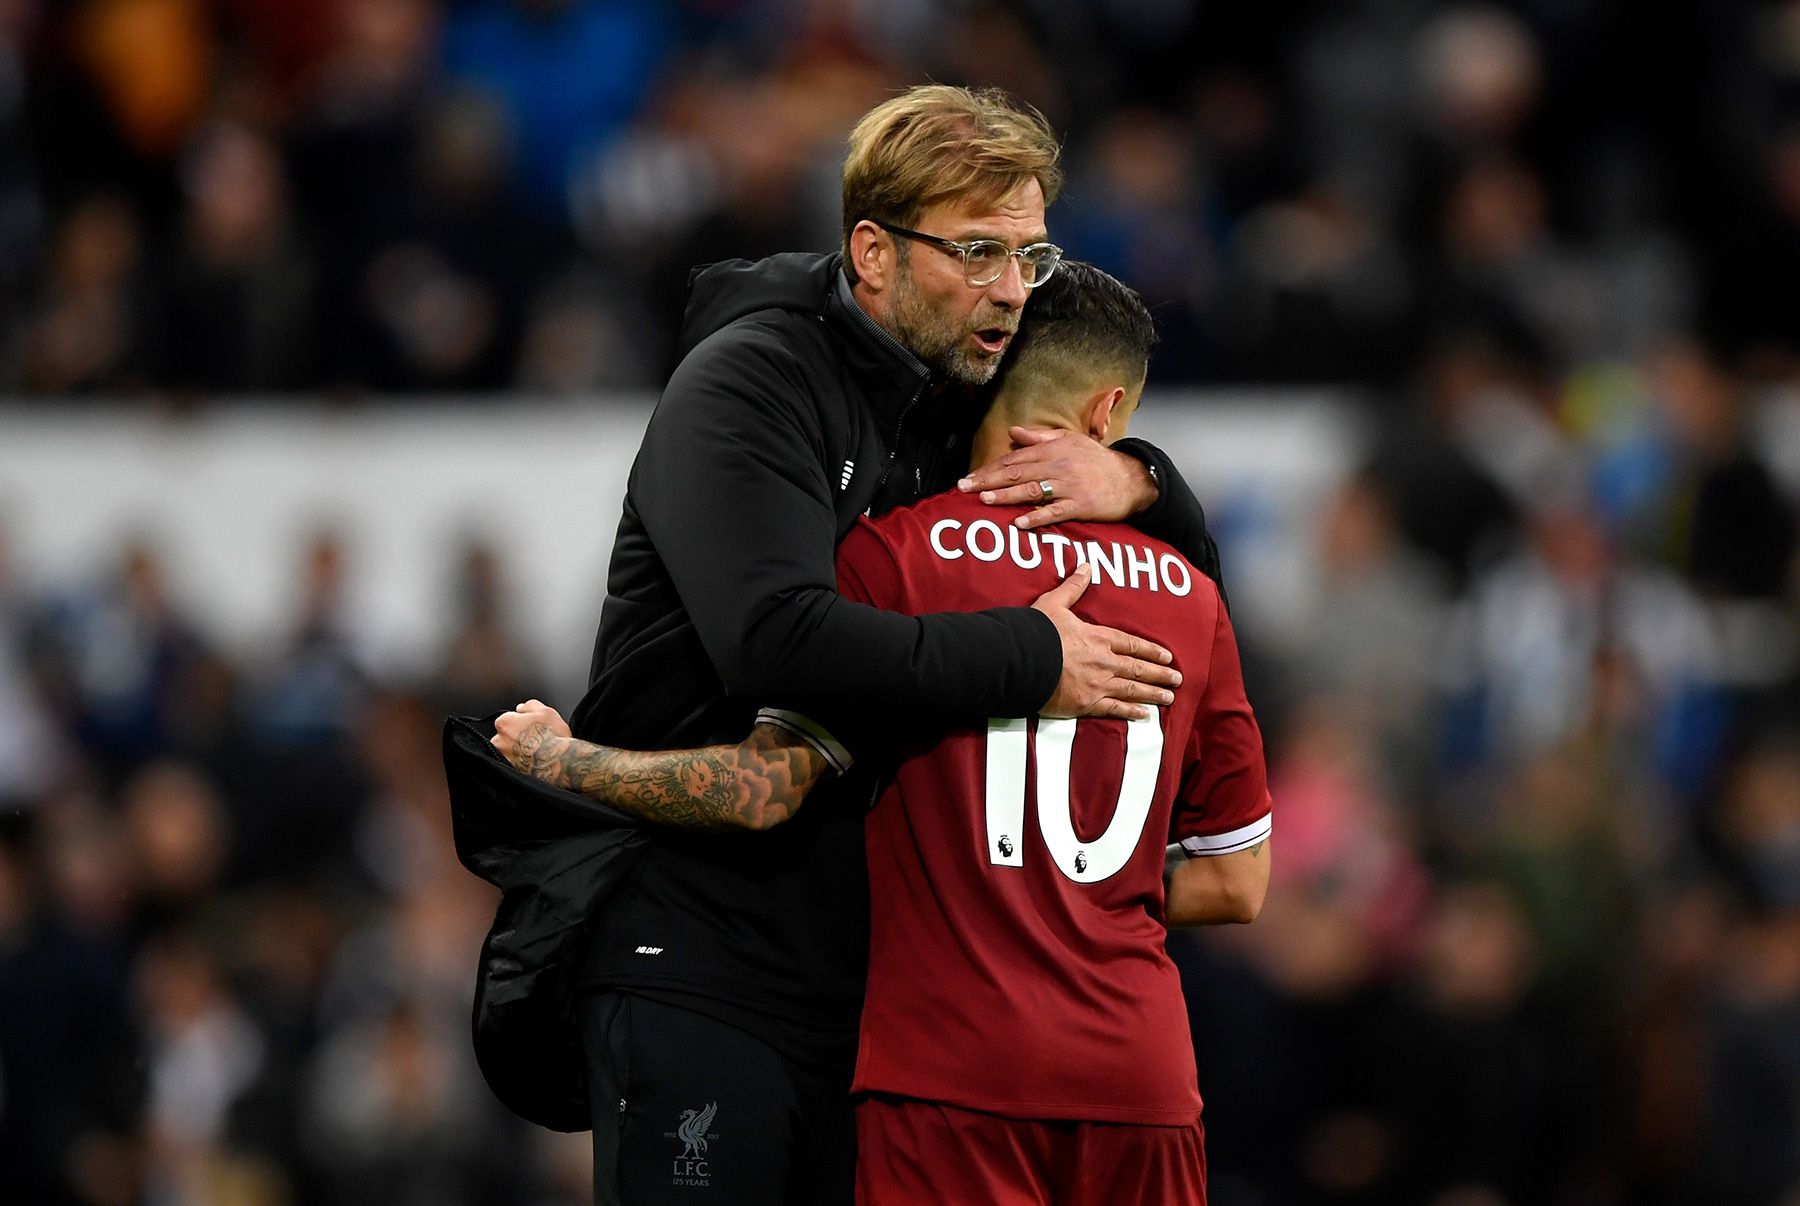 Klopp and Coutinho hug in the Brazilian stage in Liverpool